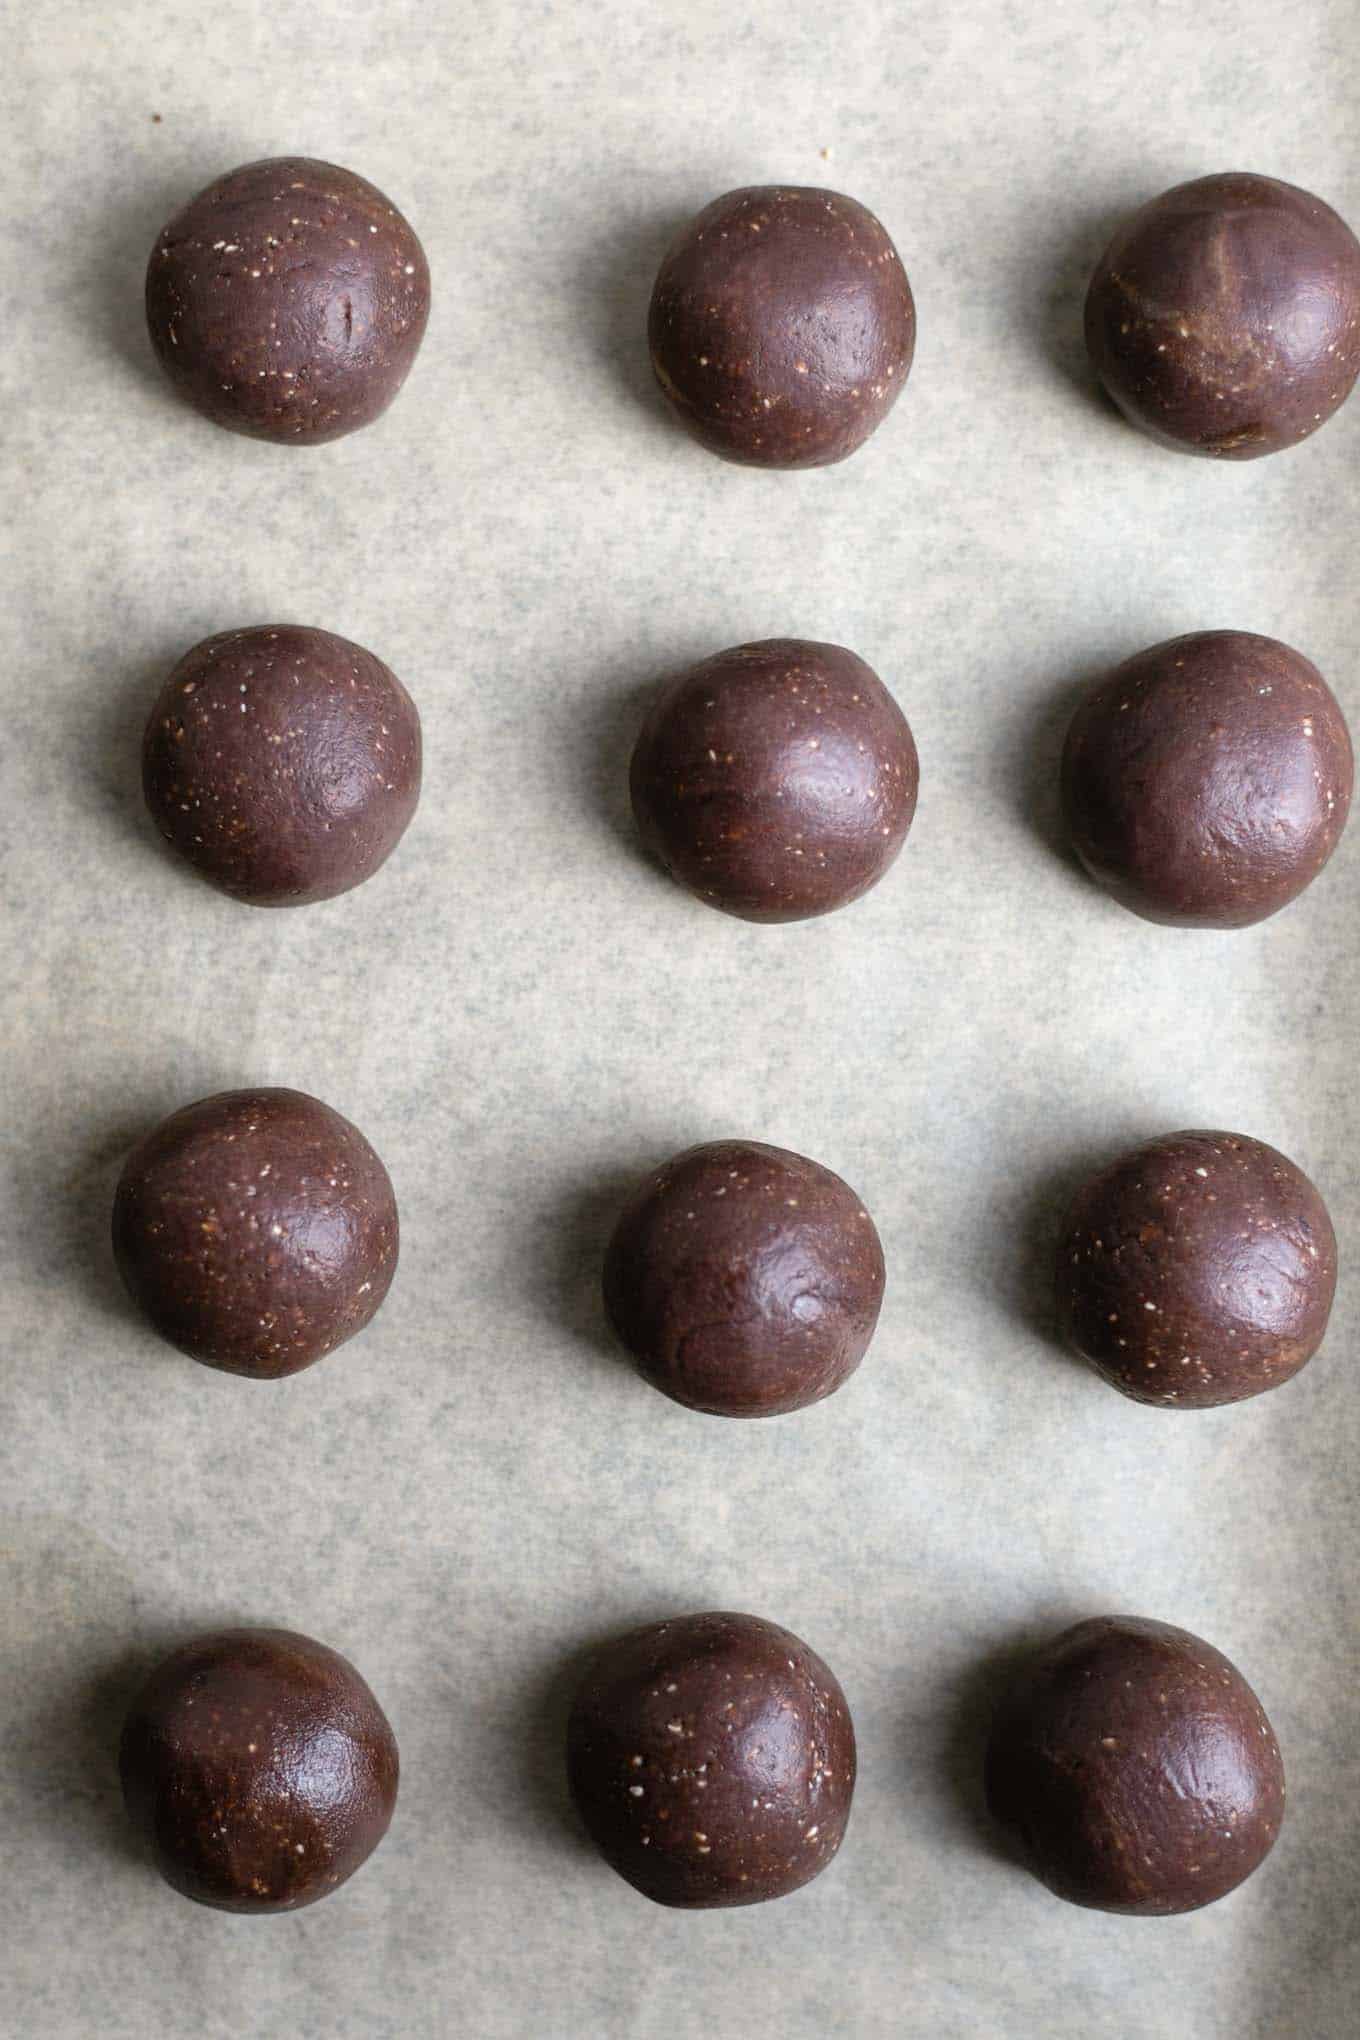 Delicious and super easy to make chocolate and peanut butter energy bites! Perfect snack on the go, packed with protein! #energybites #dairyfreerecipe #vegansnack | via @annabanana.co